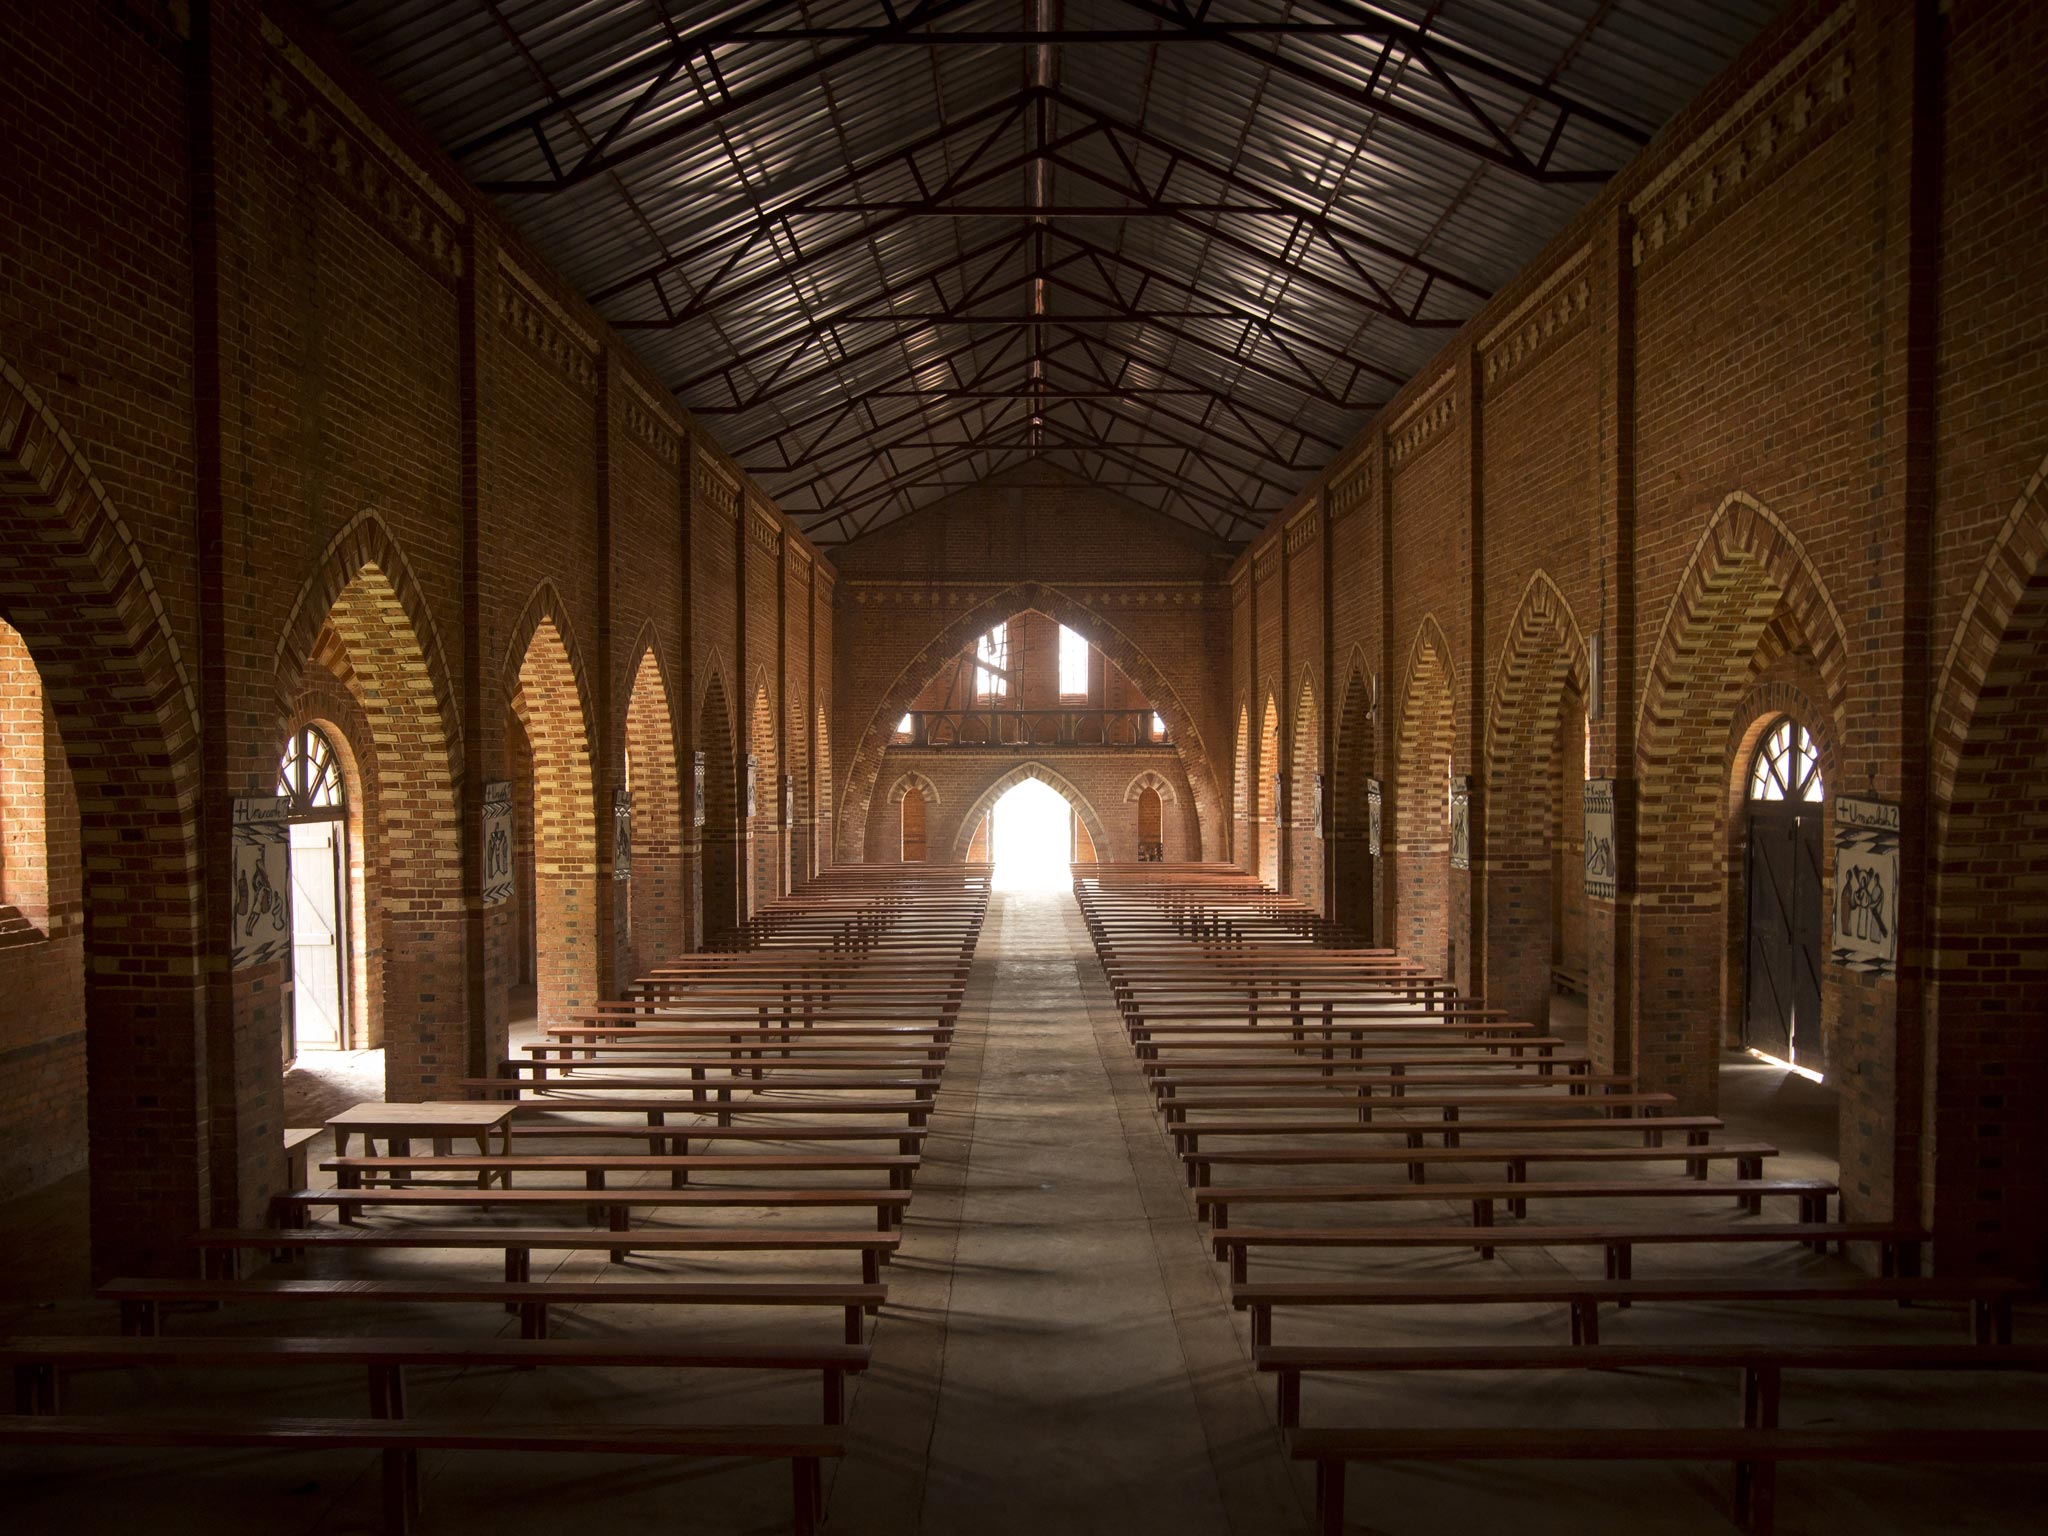 The church in the village of Nyarubuye, eastern Rwanda which was the scene of a massacre during the 1994 genocide and is now a genocide memorial